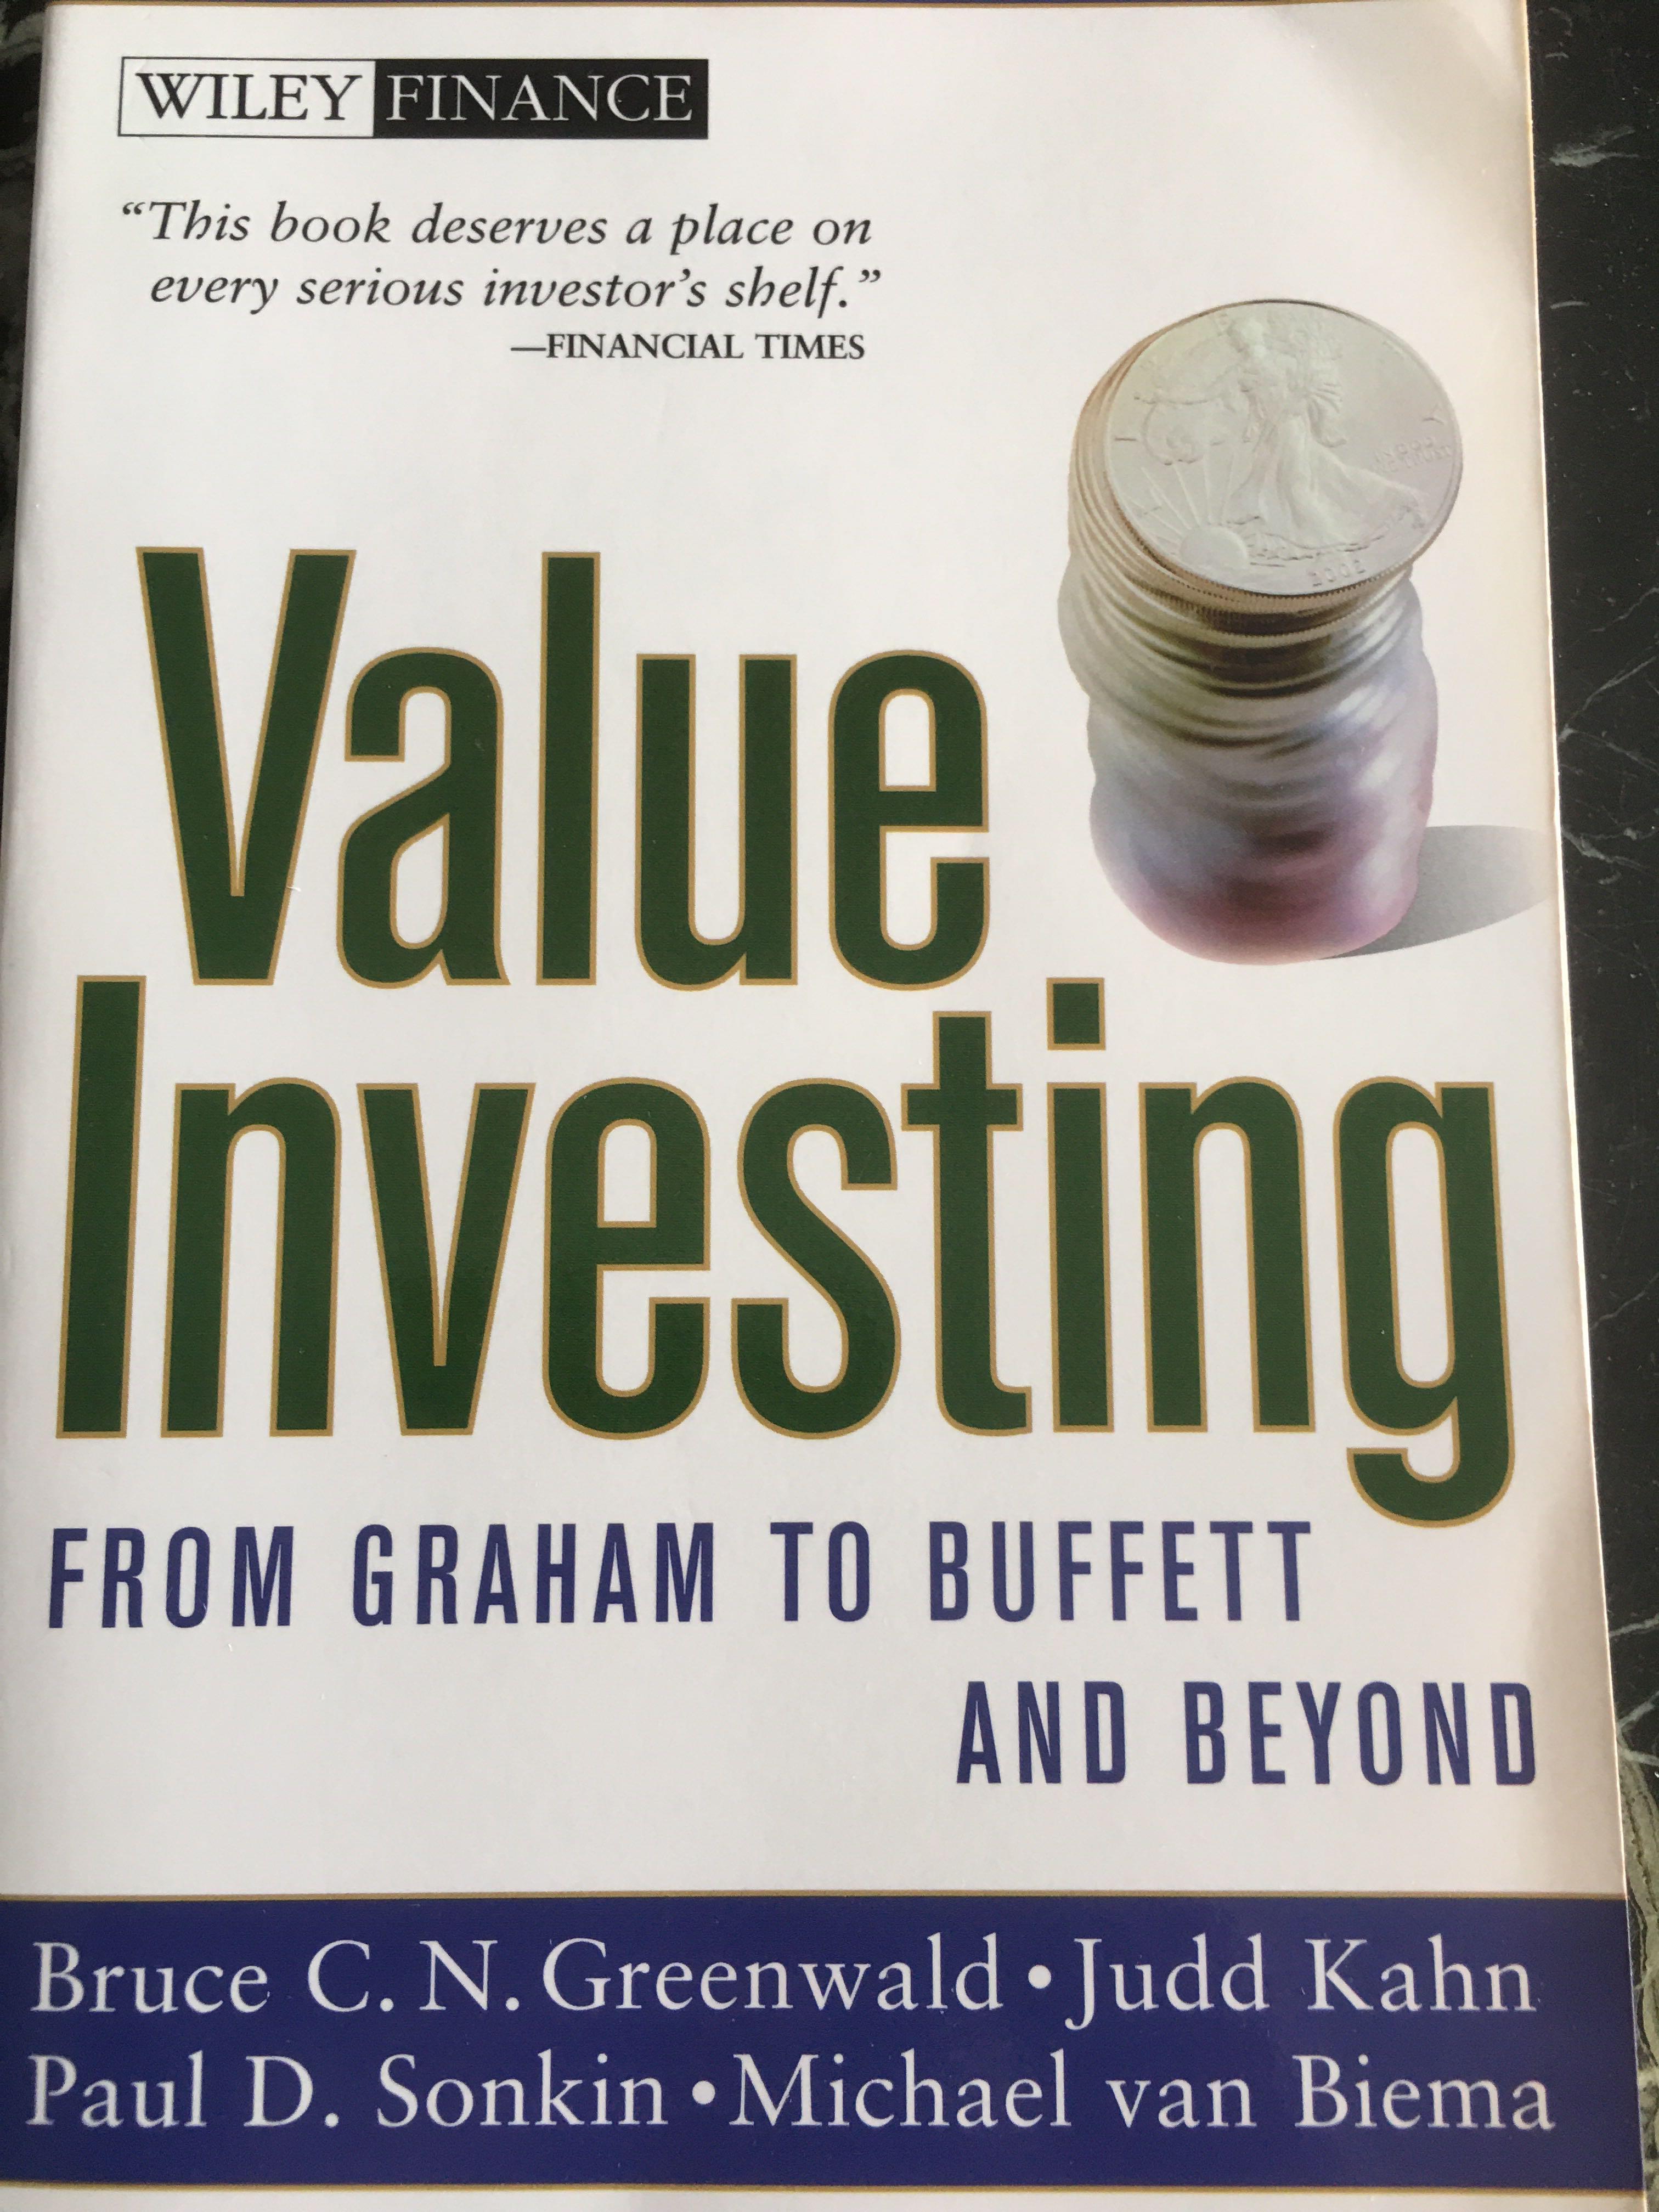 Value investing from graham to buffett and beyond epub reader futures and forex expo malaysia